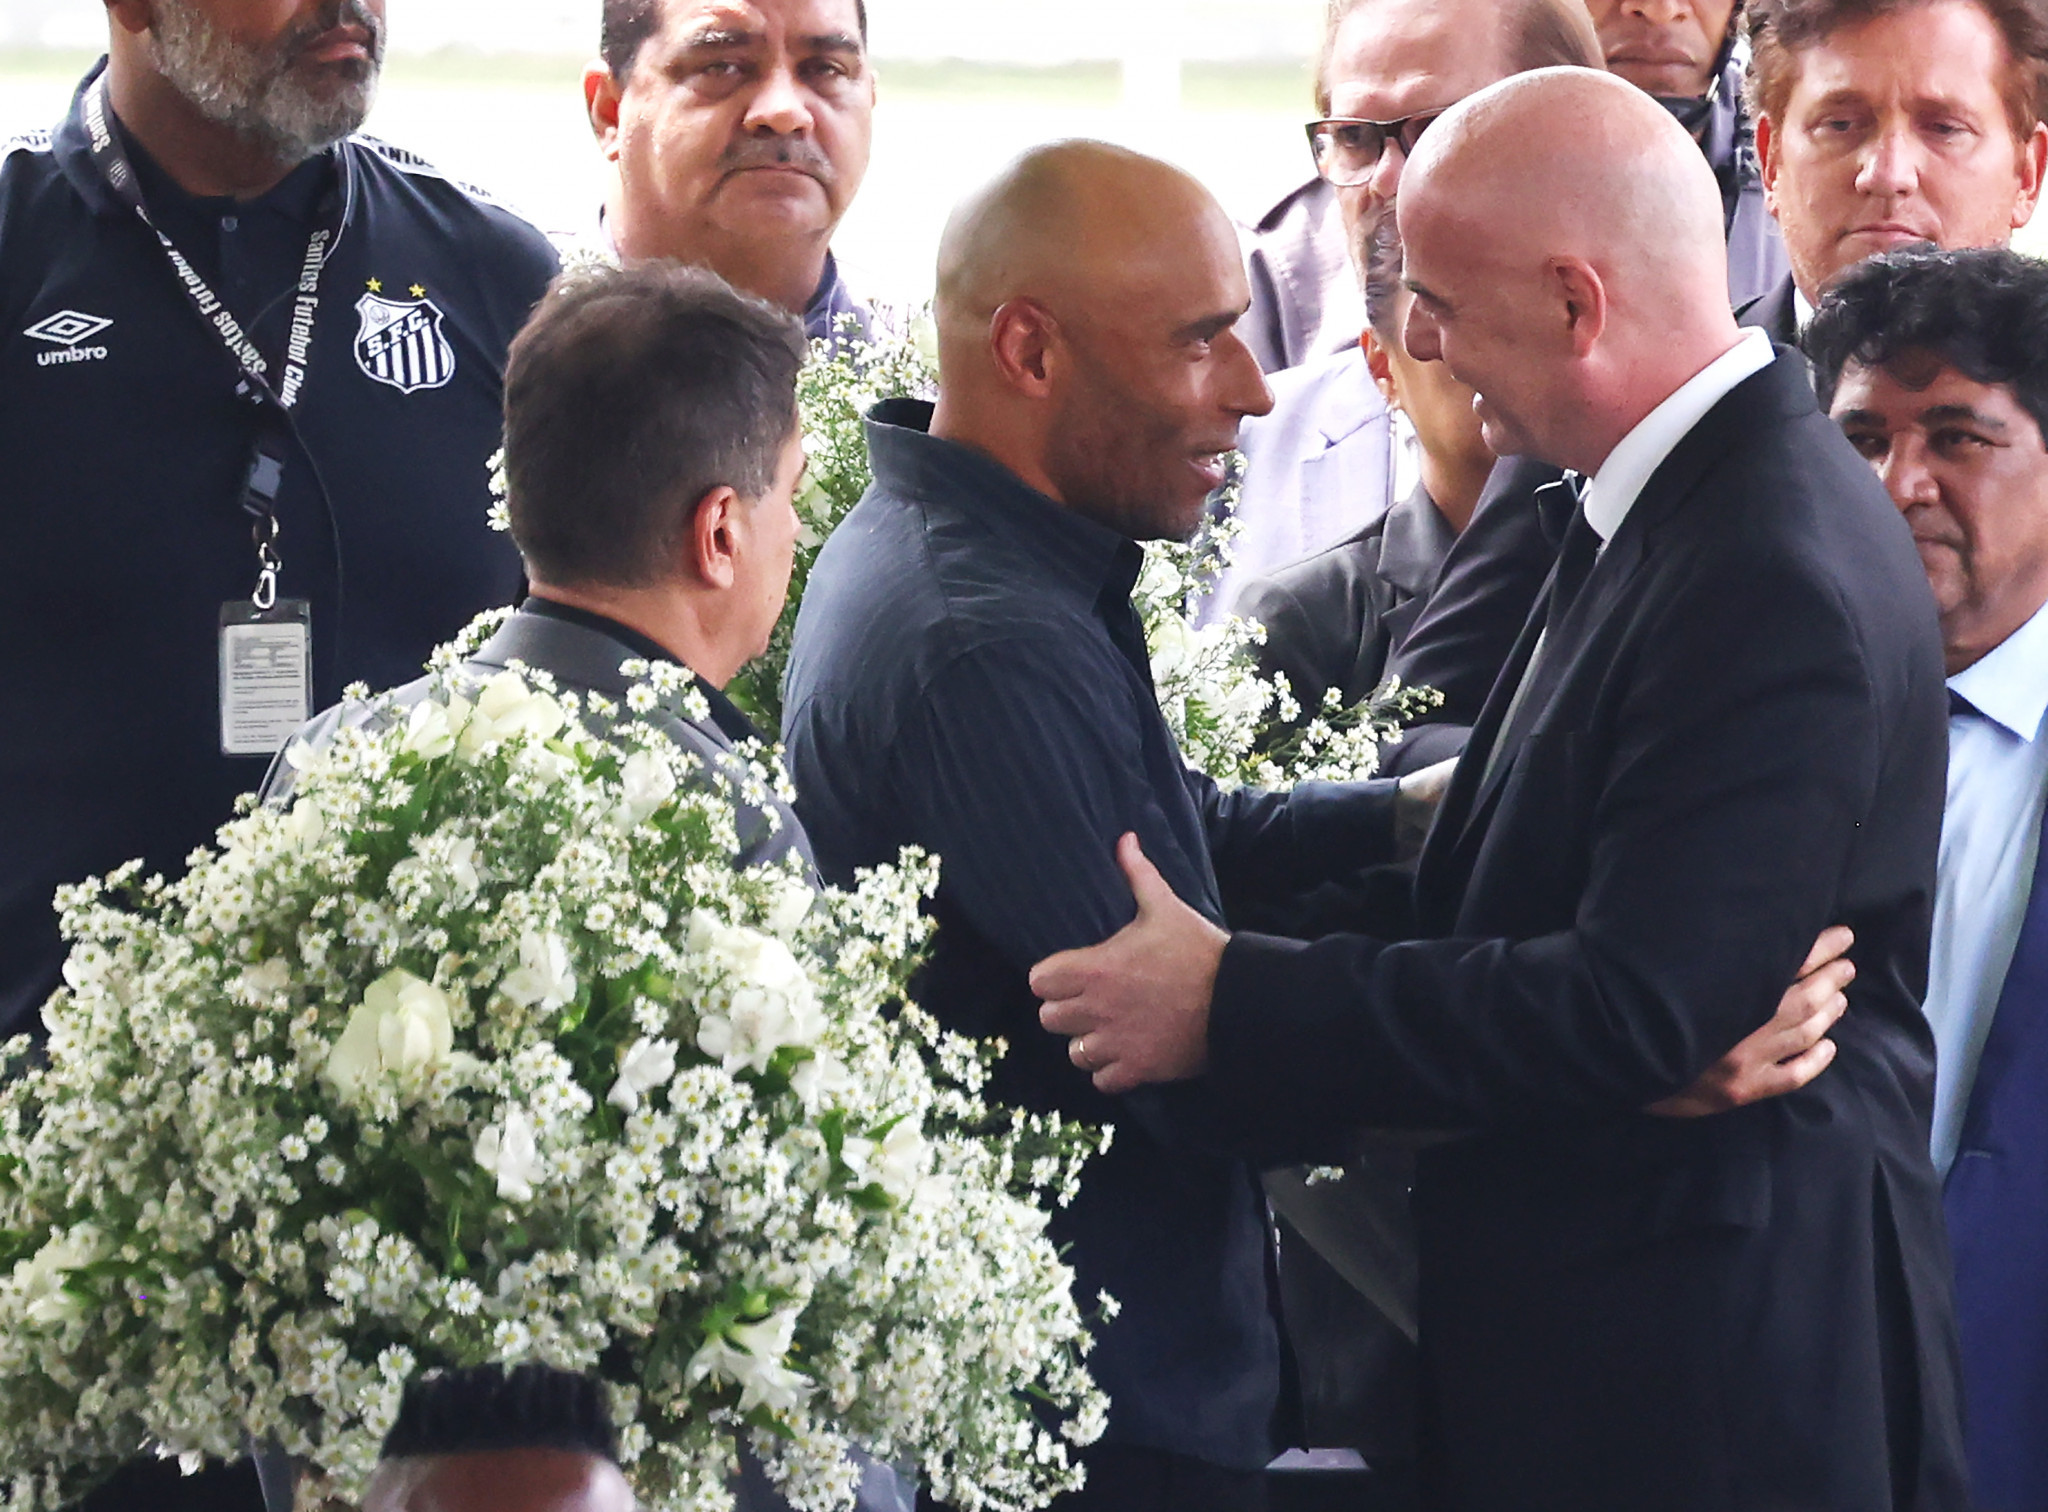 FIFA President Gianni Infantino, right, attended the wake and consoled Pelé's family, including son Edinho, centre ©Getty Images